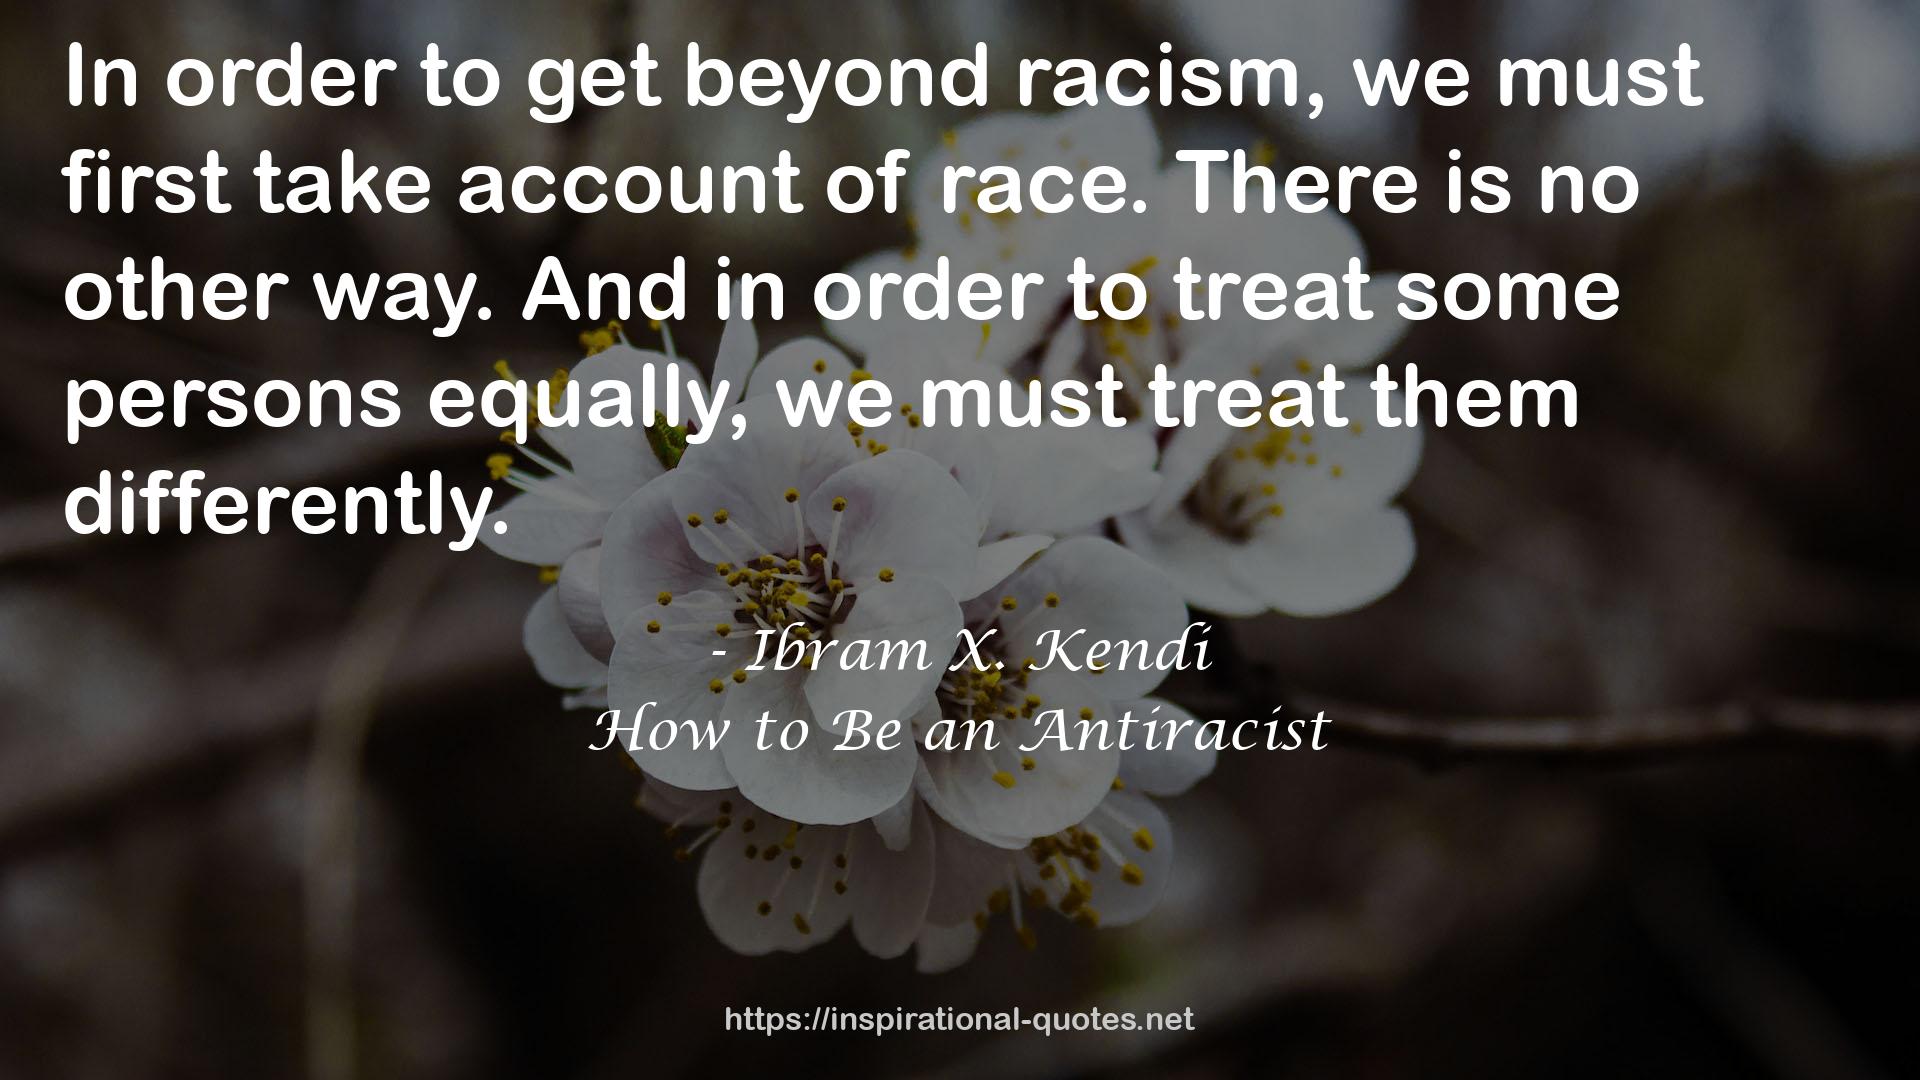 How to Be an Antiracist QUOTES